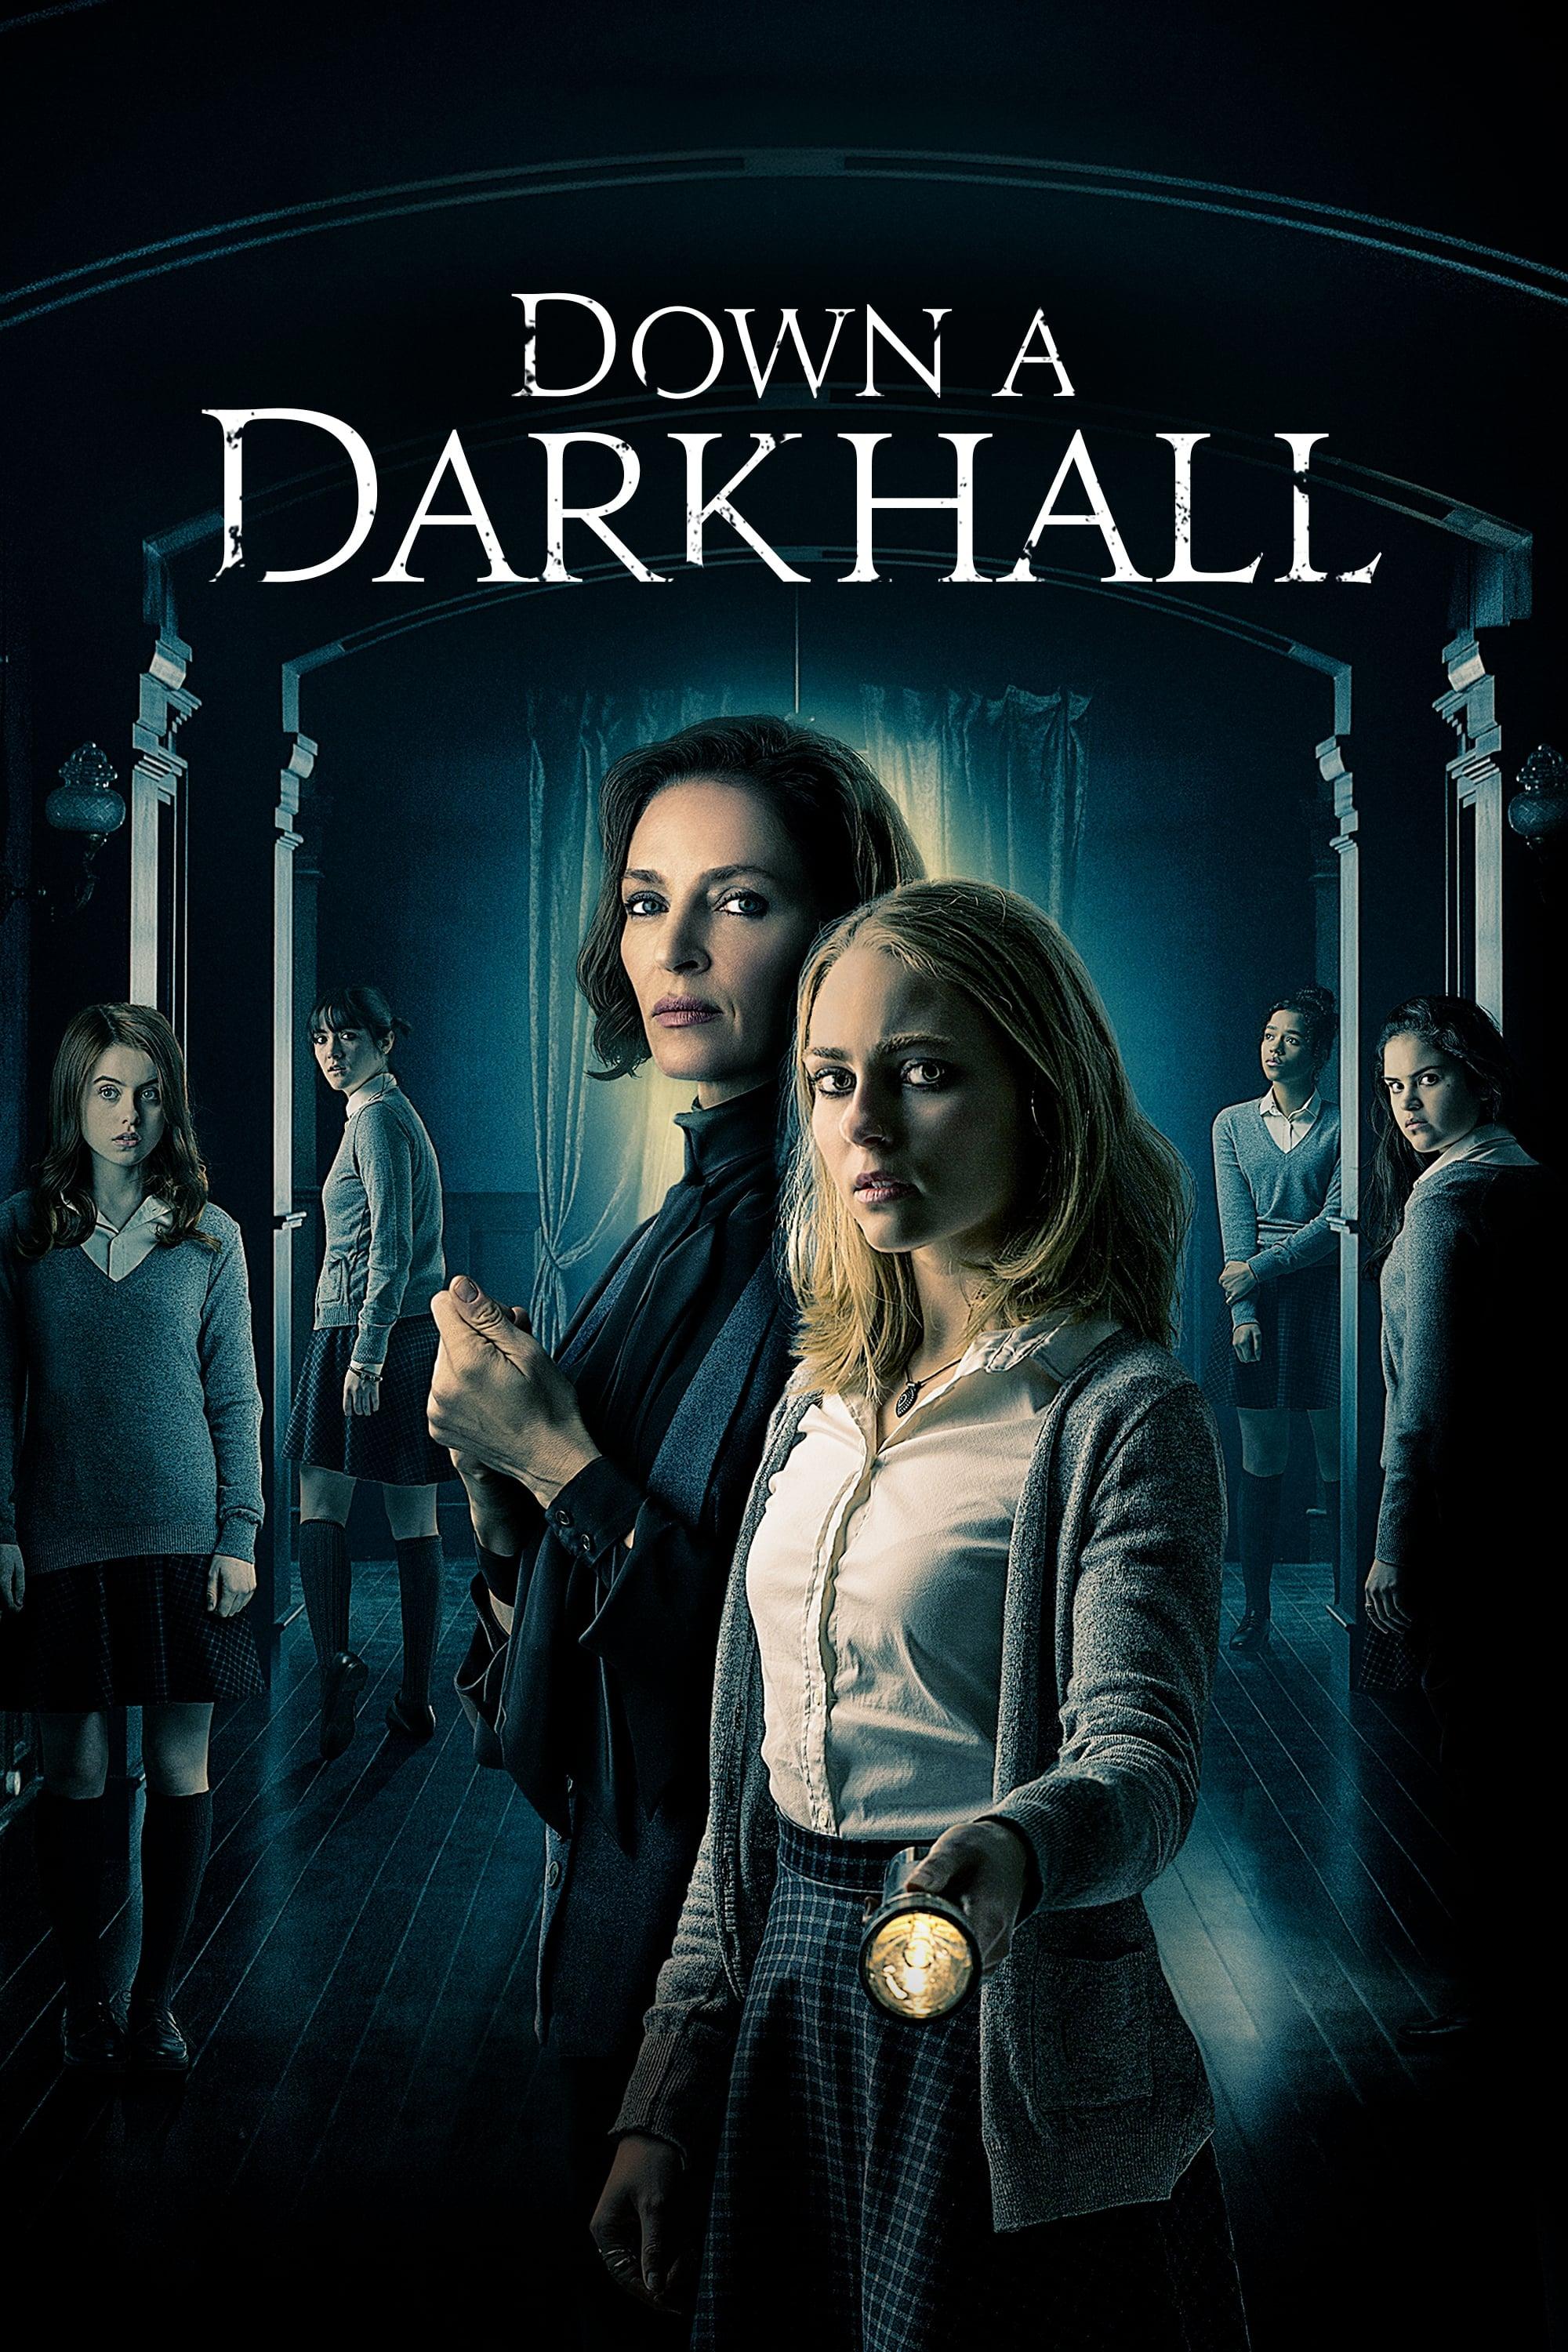 Down a Dark Hall poster